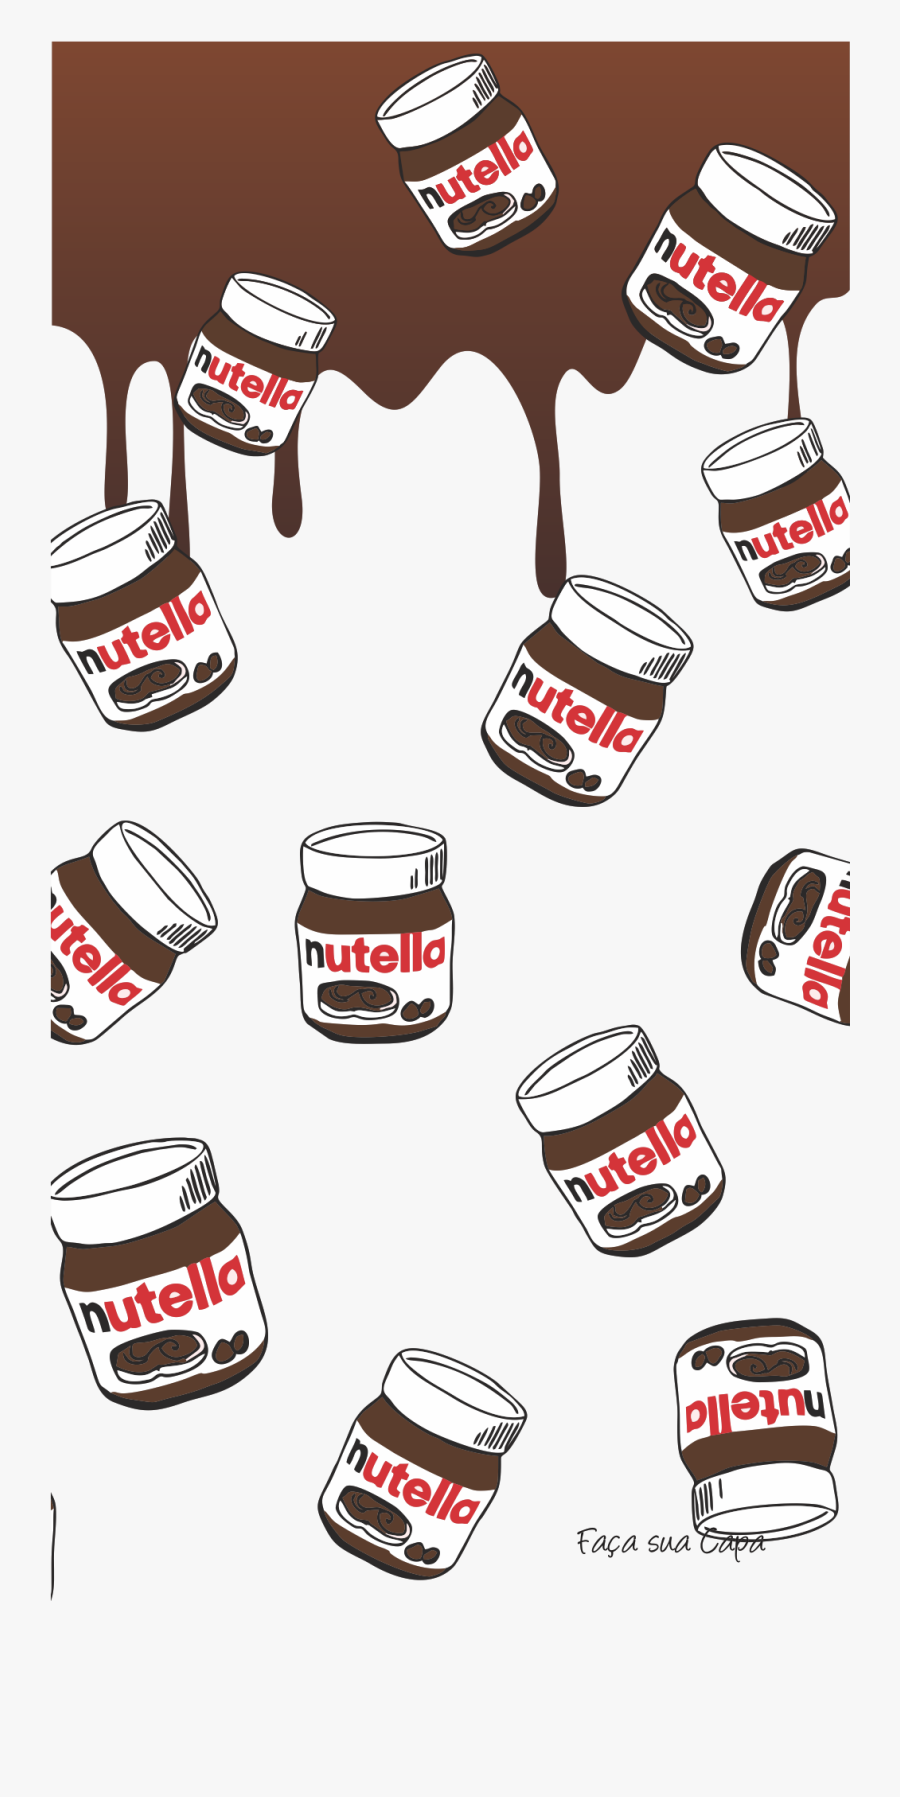 Nutella Cool Iphone Backgrounds, Iphone Wallpaper Food, - Nutella Background, Transparent Clipart